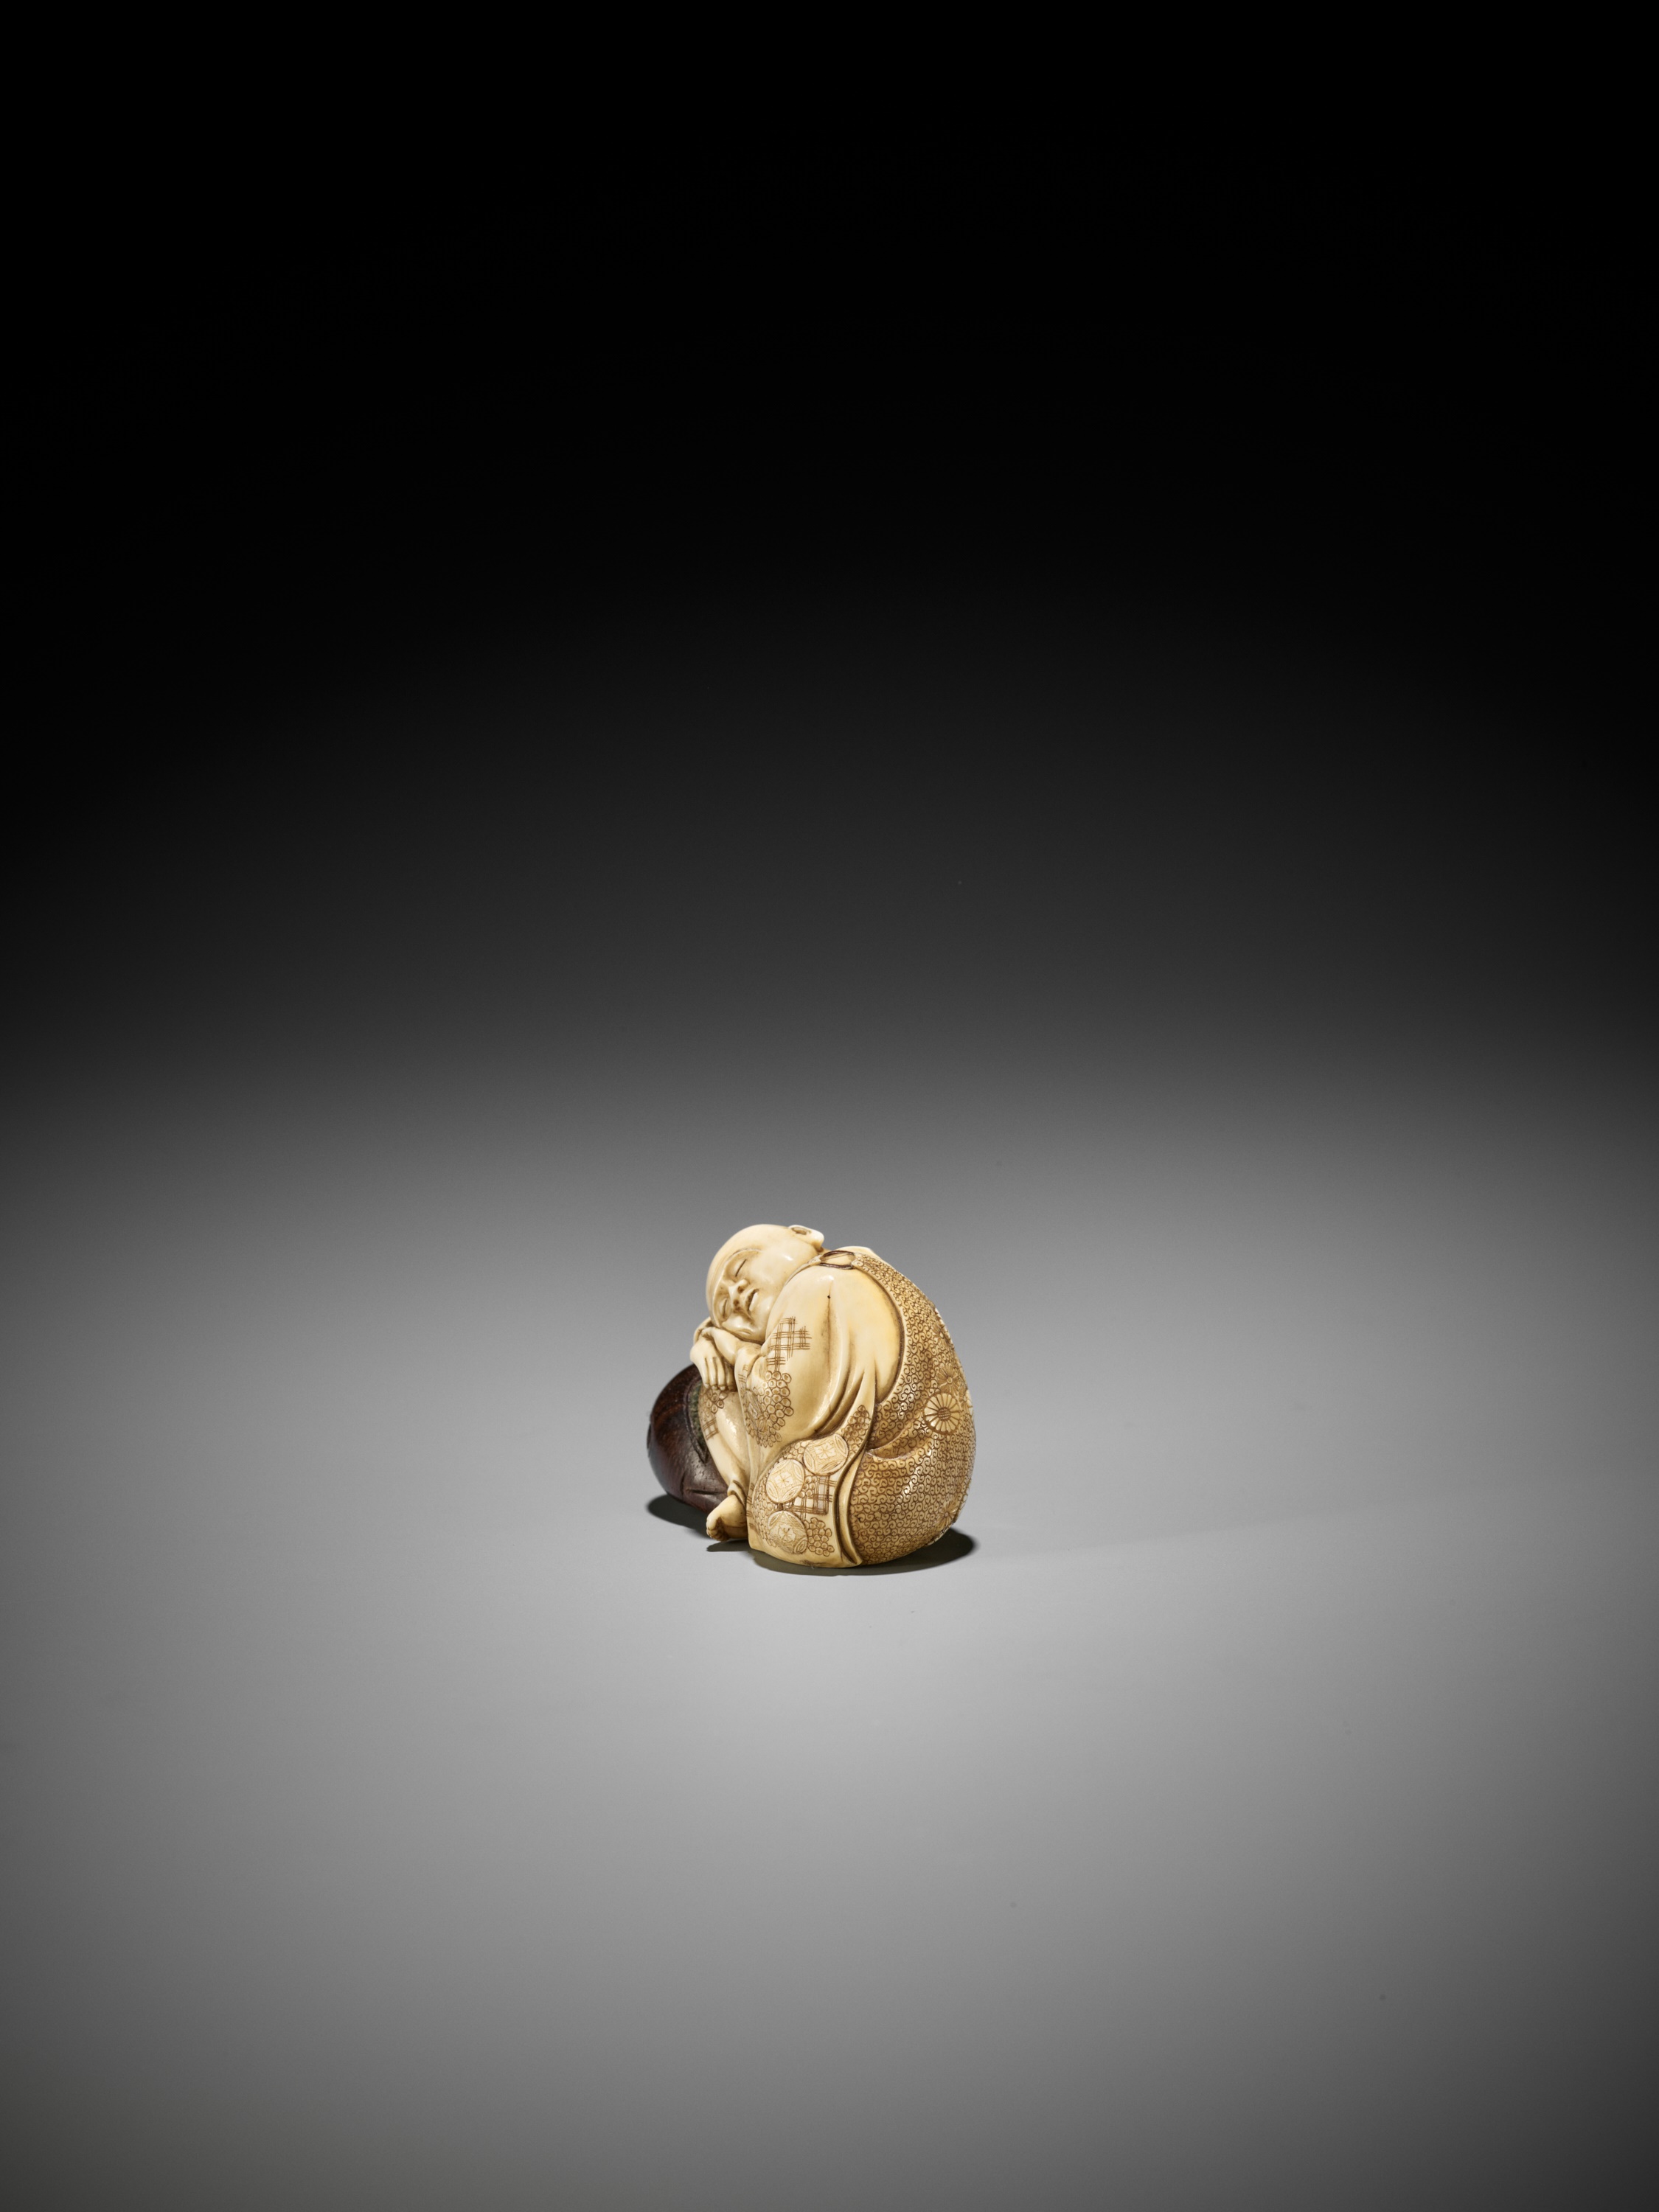 GYOKUSUI: A FINE TOKYO SCHOOL IVORY AND WOOD NETSUKE OF A PRIEST RESTING ON A MOKUGYO - Image 4 of 11